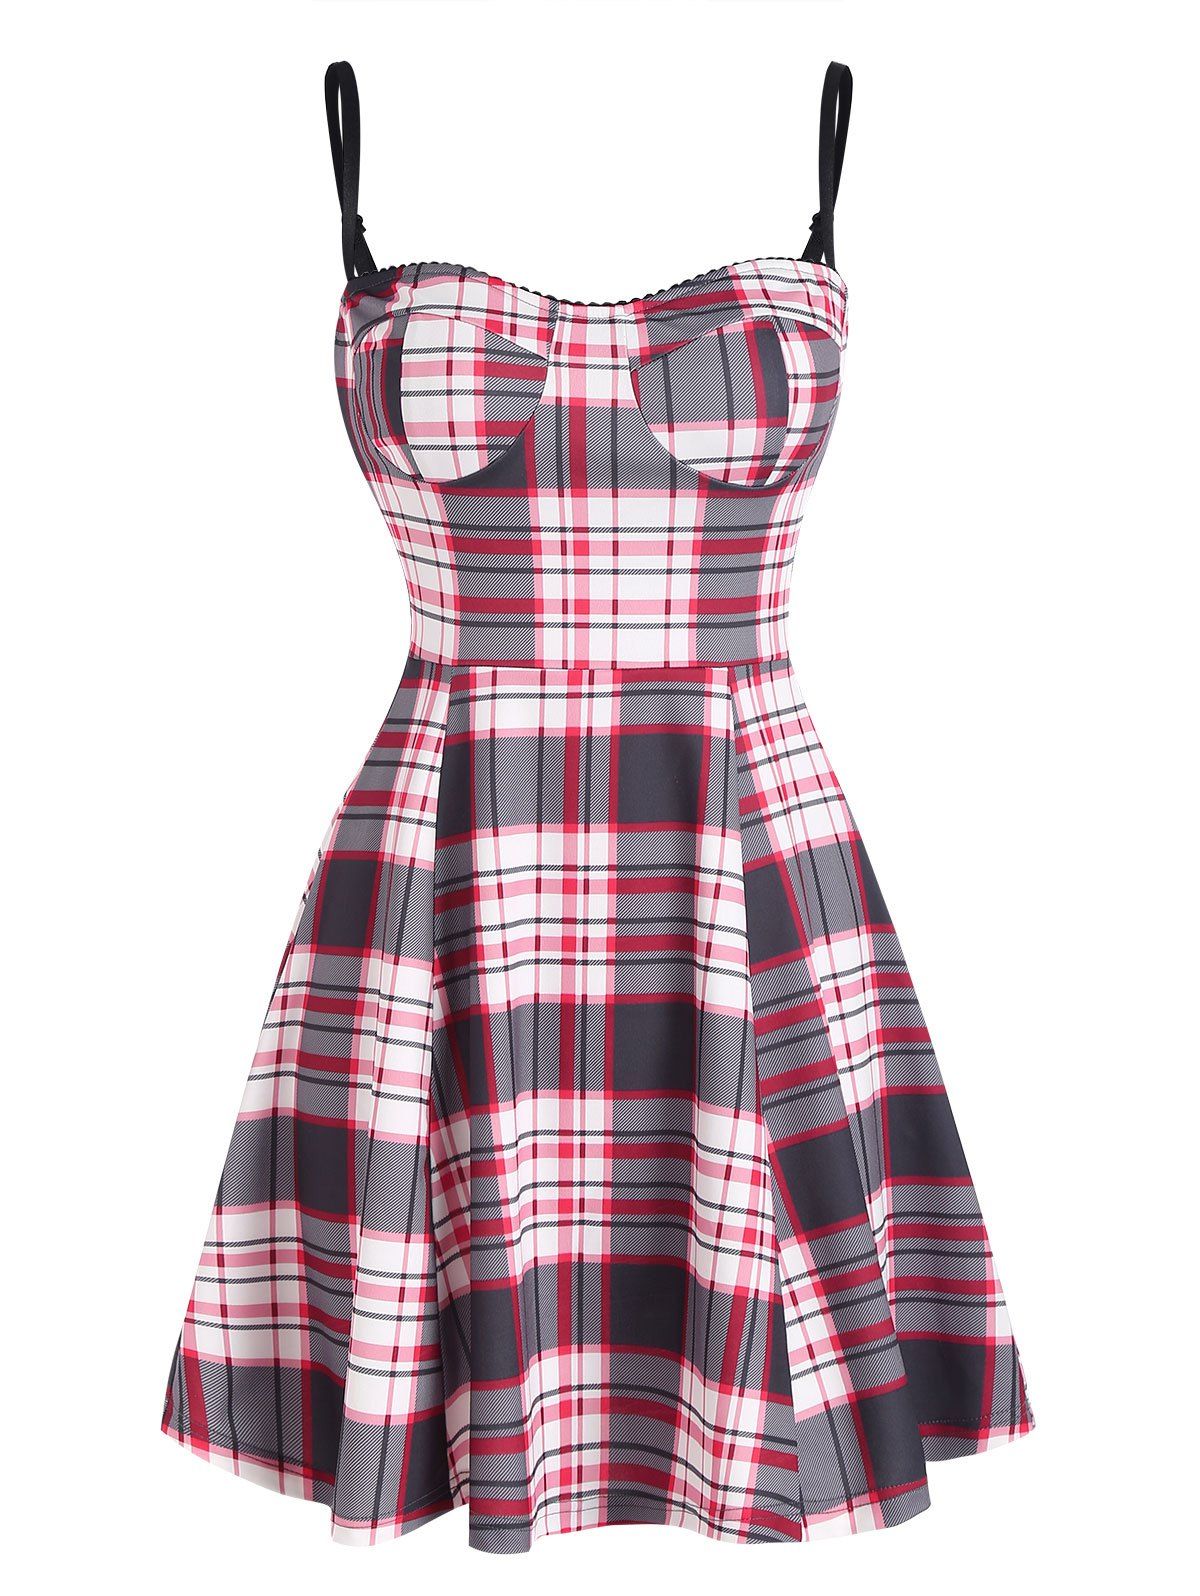 Retro Plaid Checked Cupped Corset Style Cami Skater Dress - LIGHT PINK XL